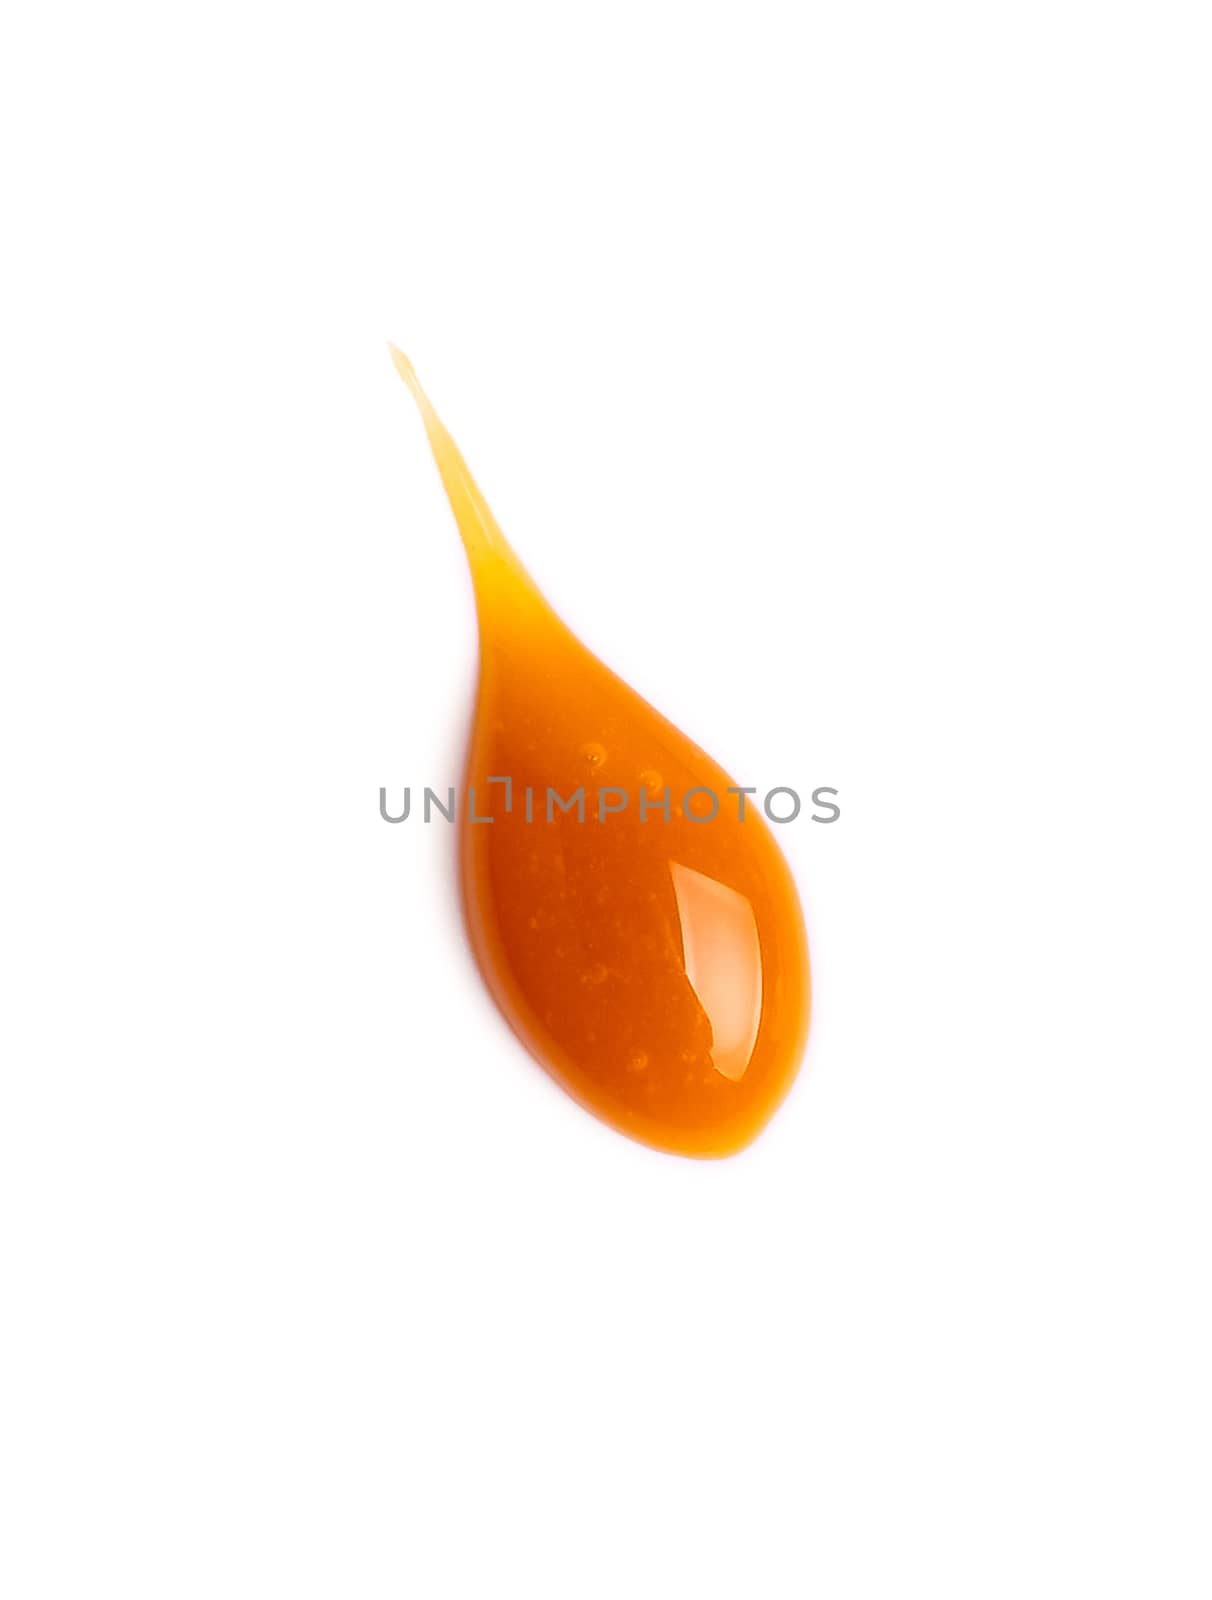 sweet caramel sauce drop isolated on white background Top view or flat lay. Caramel drop isolated on white with clipping path.